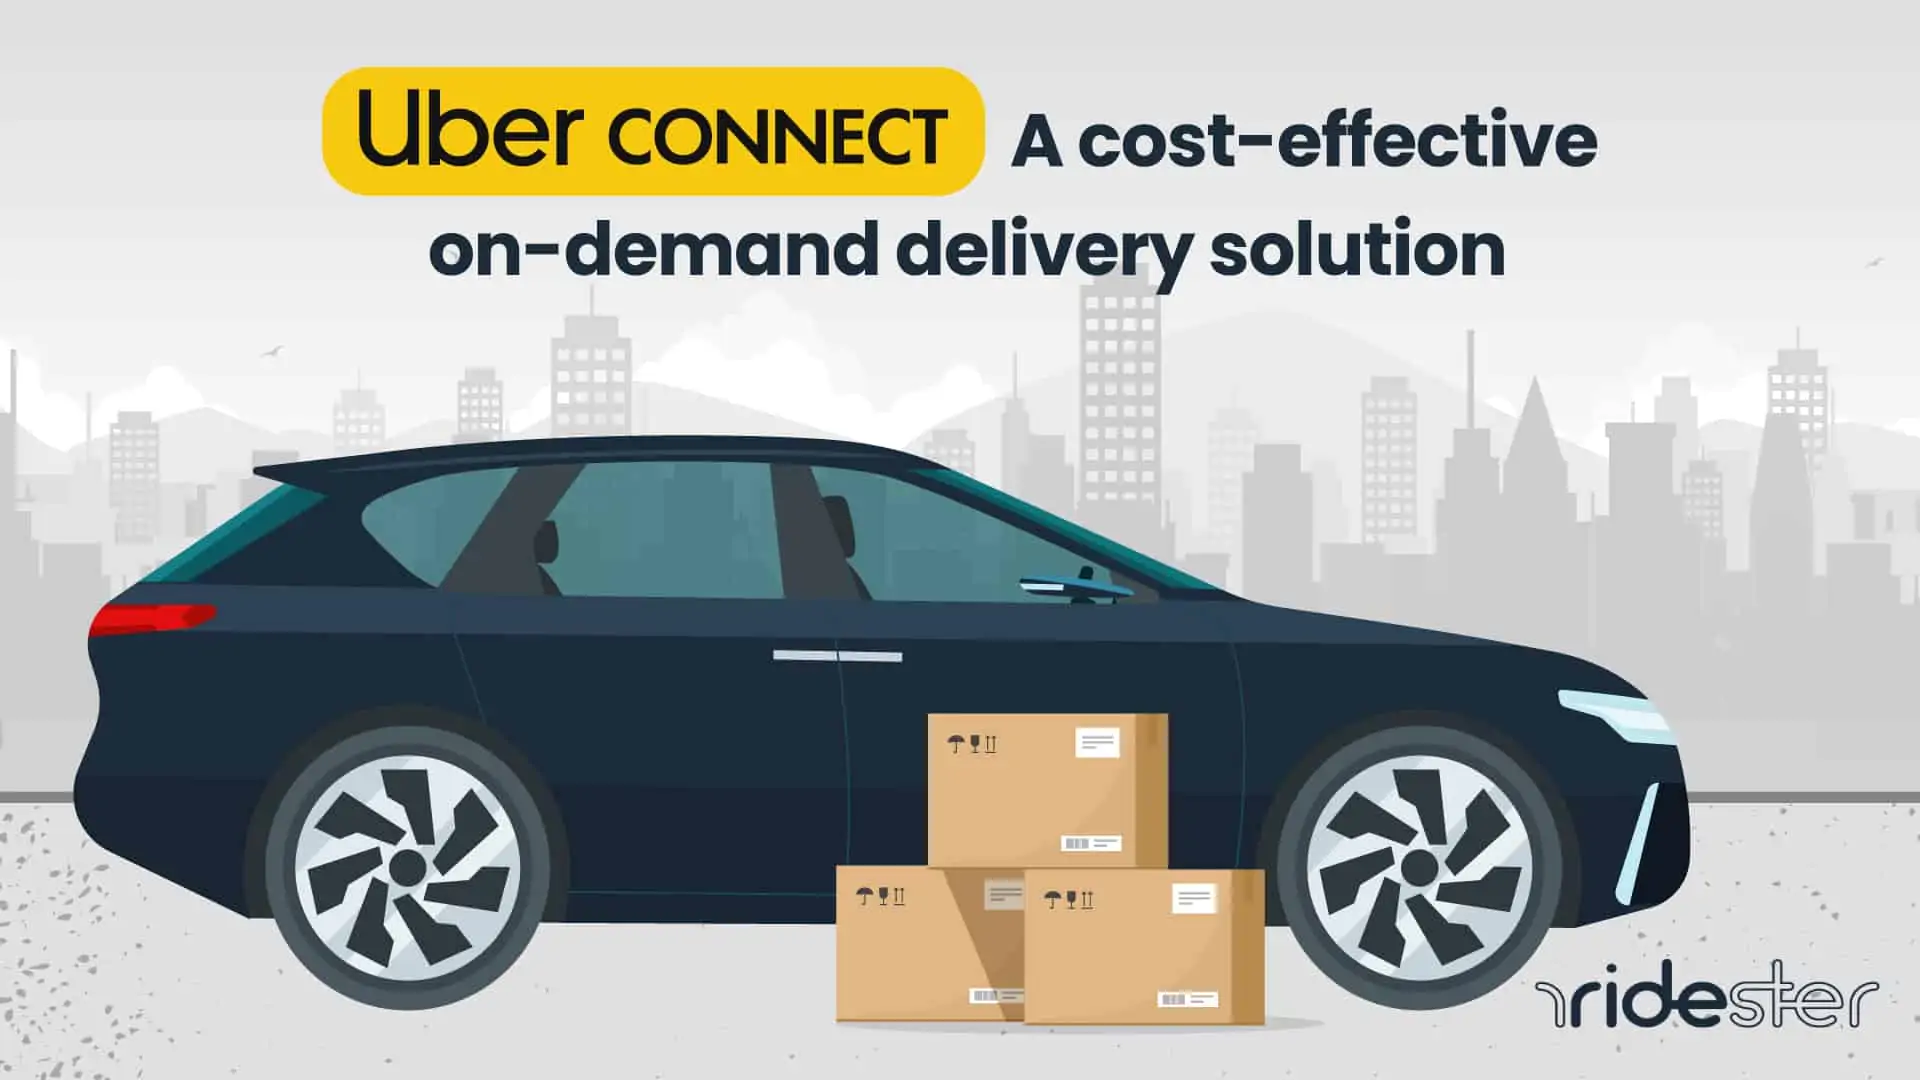 vector graphic showing an Uber Connect vehicle in front of packages in a city